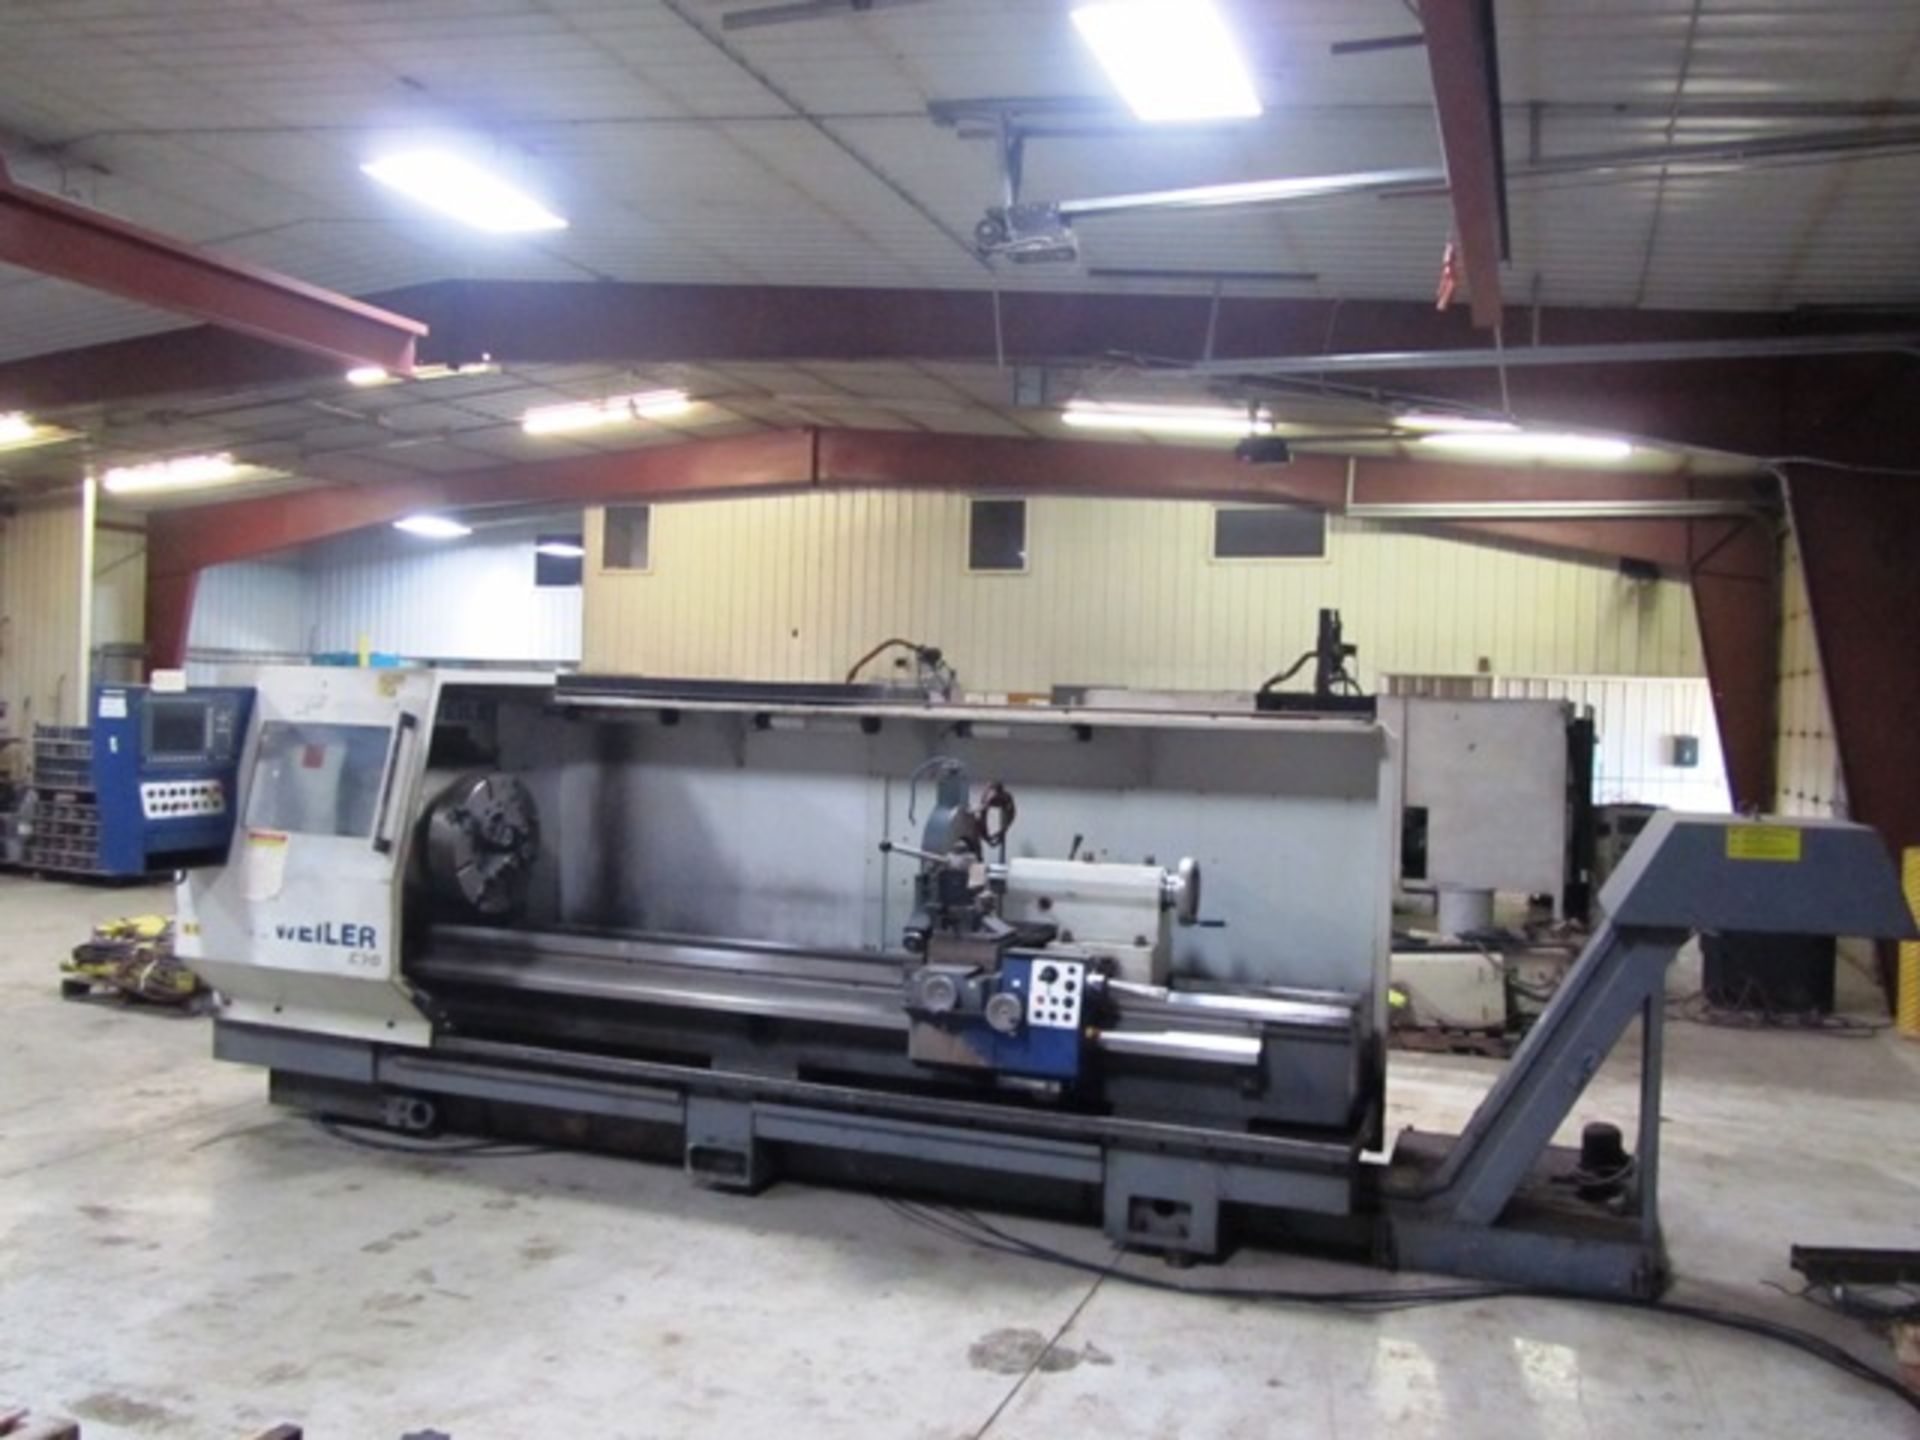 Weiler E70/3000 Large Bore CNC Flat Bed Lathe with 8-3/4'' Thru-Hole, Front 23-1/2'' 4-Jaw Chuck, - Image 3 of 4